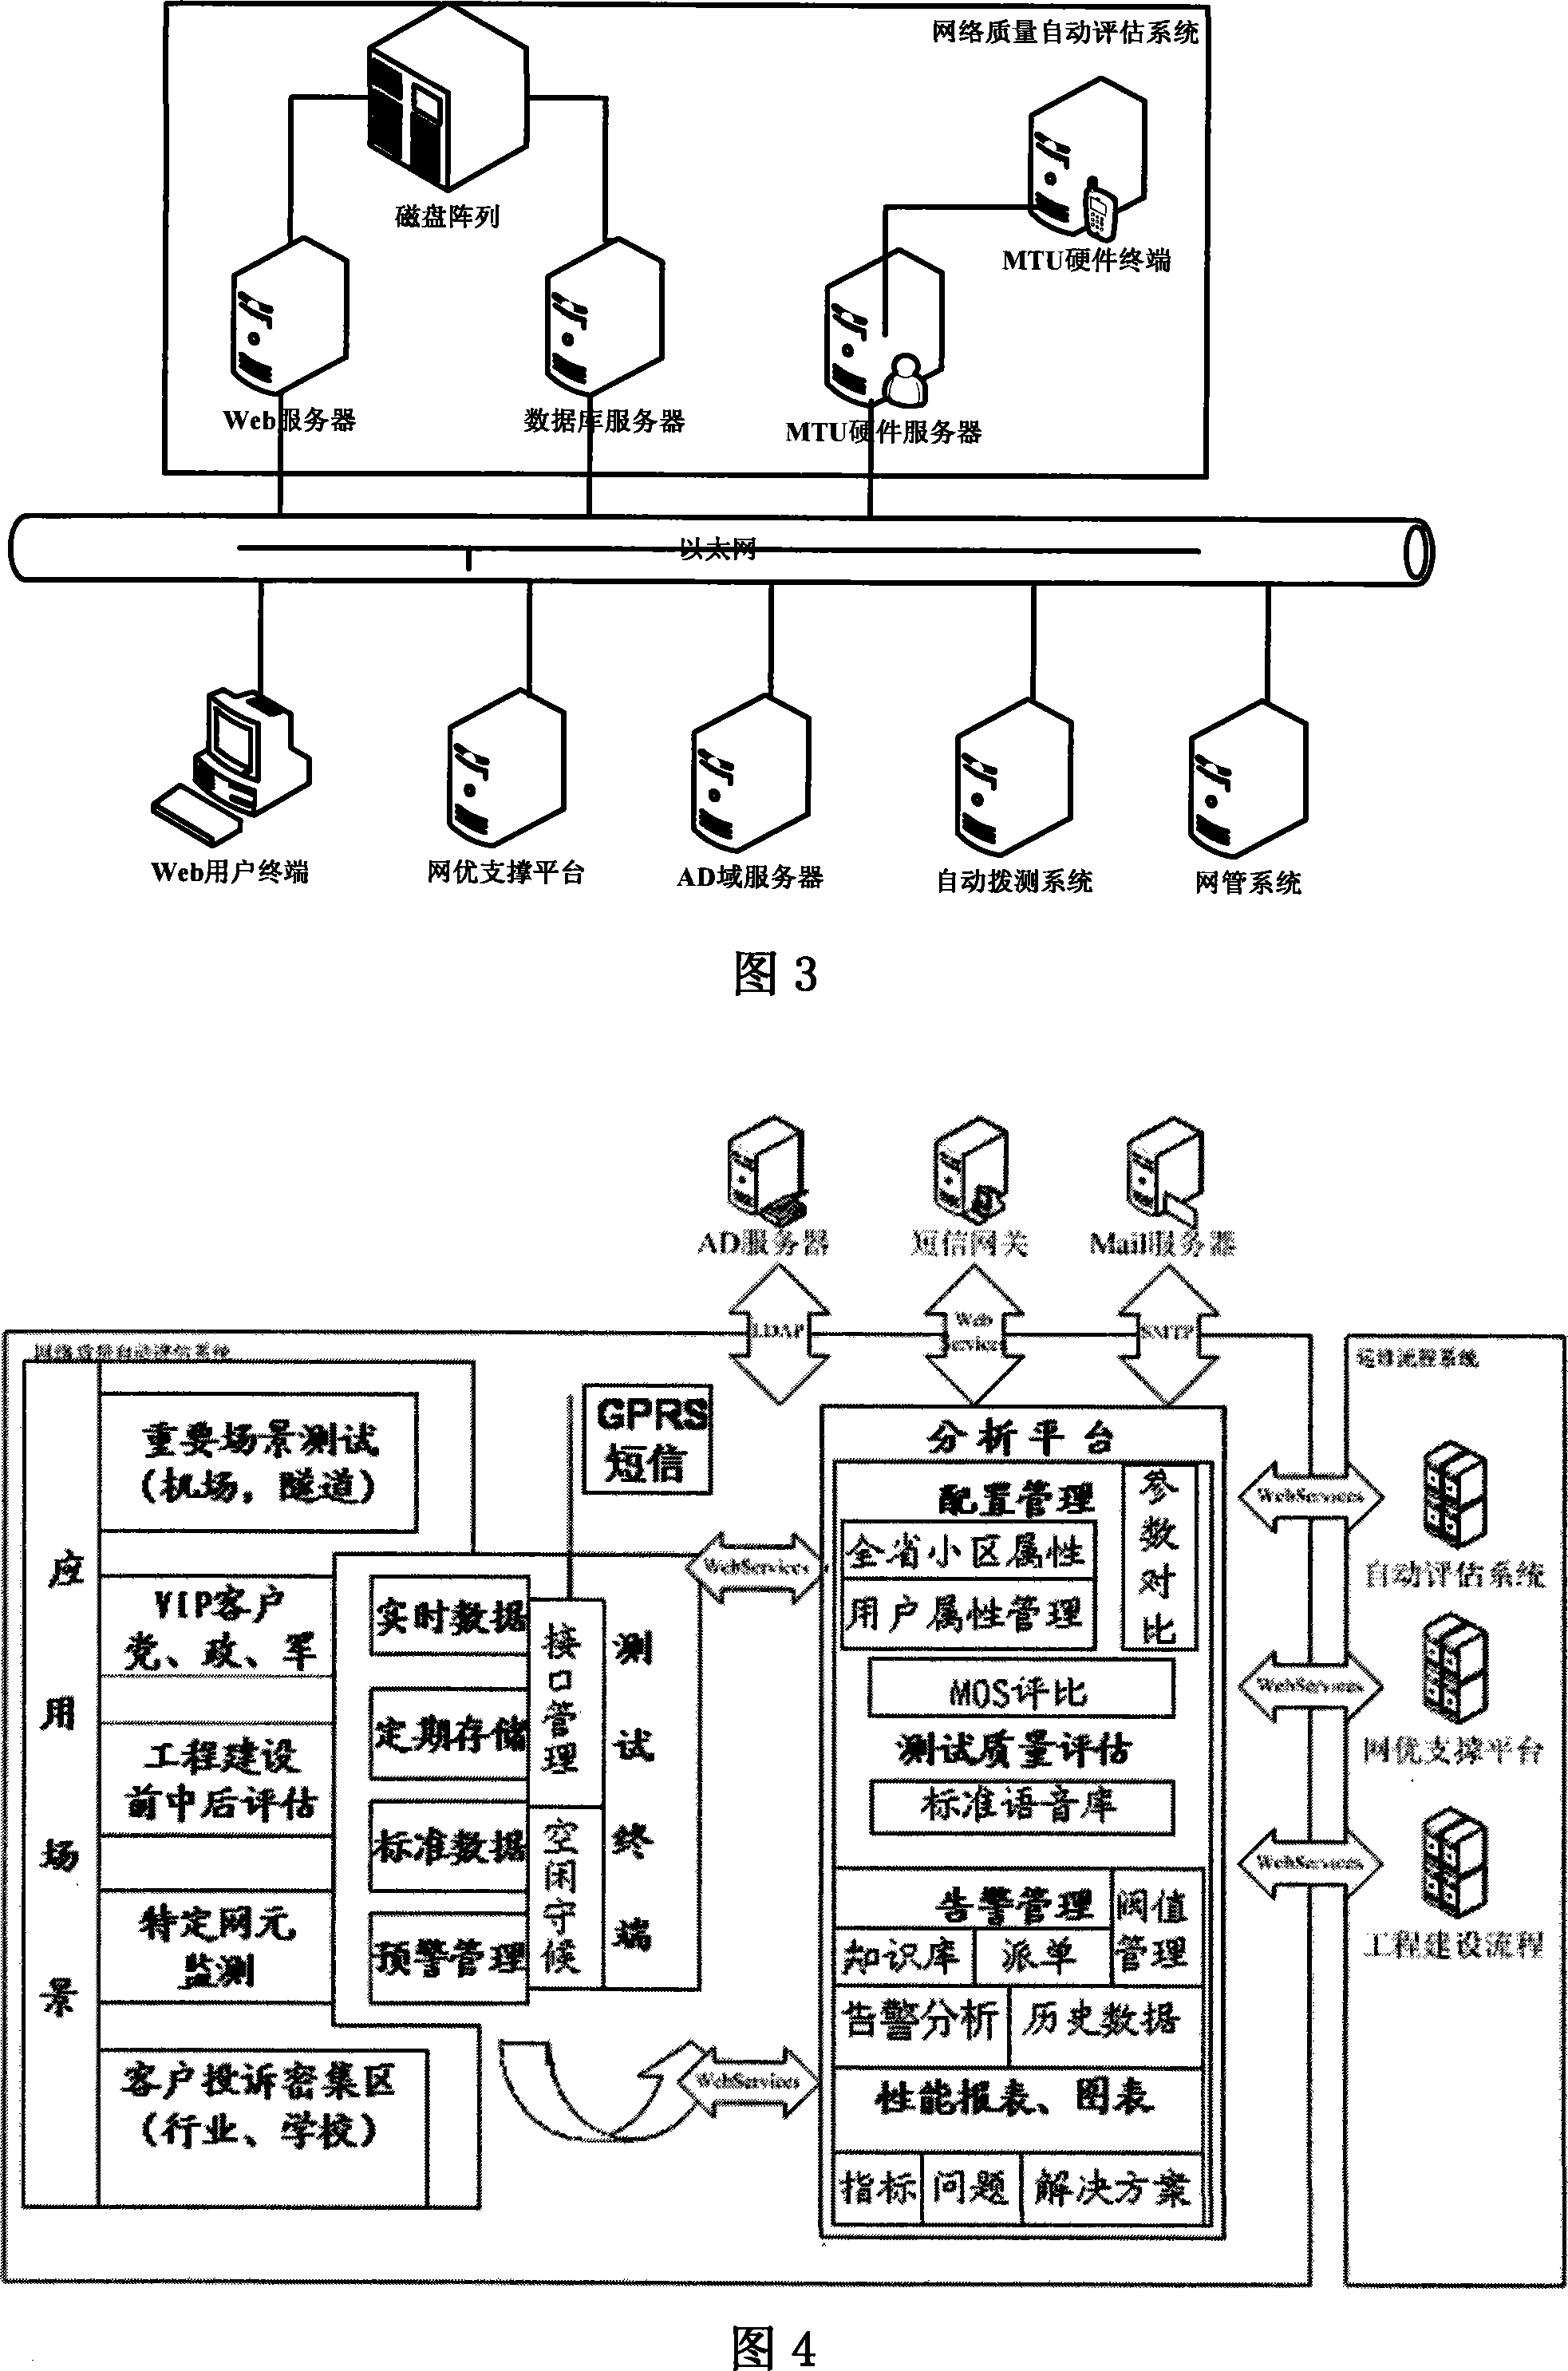 An automatic evaluating and analyzing device and method for mobile communication network quality